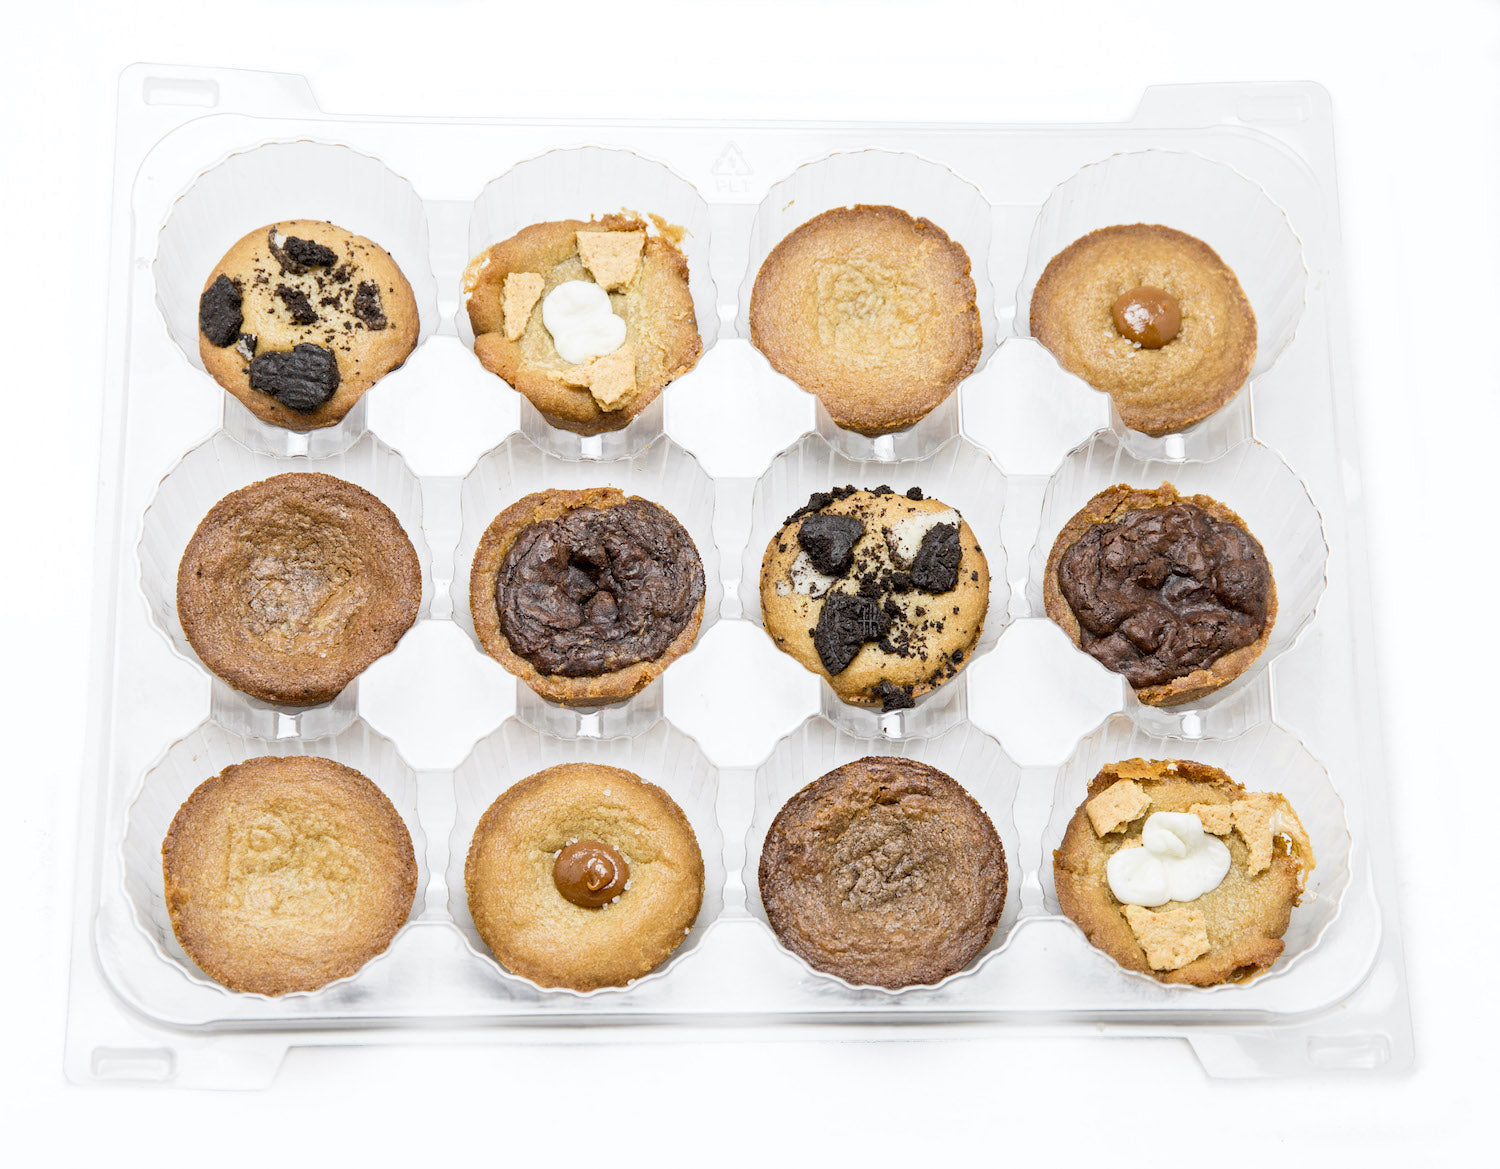 double the dough, double the fun! Assortment Flight — 2 Chocolate Mountain, 2 Cookies ‘n’ Cream, 2 Nutella, 2 Peanut Butter Infused, 2 Salted Caramel, 2 S’mores